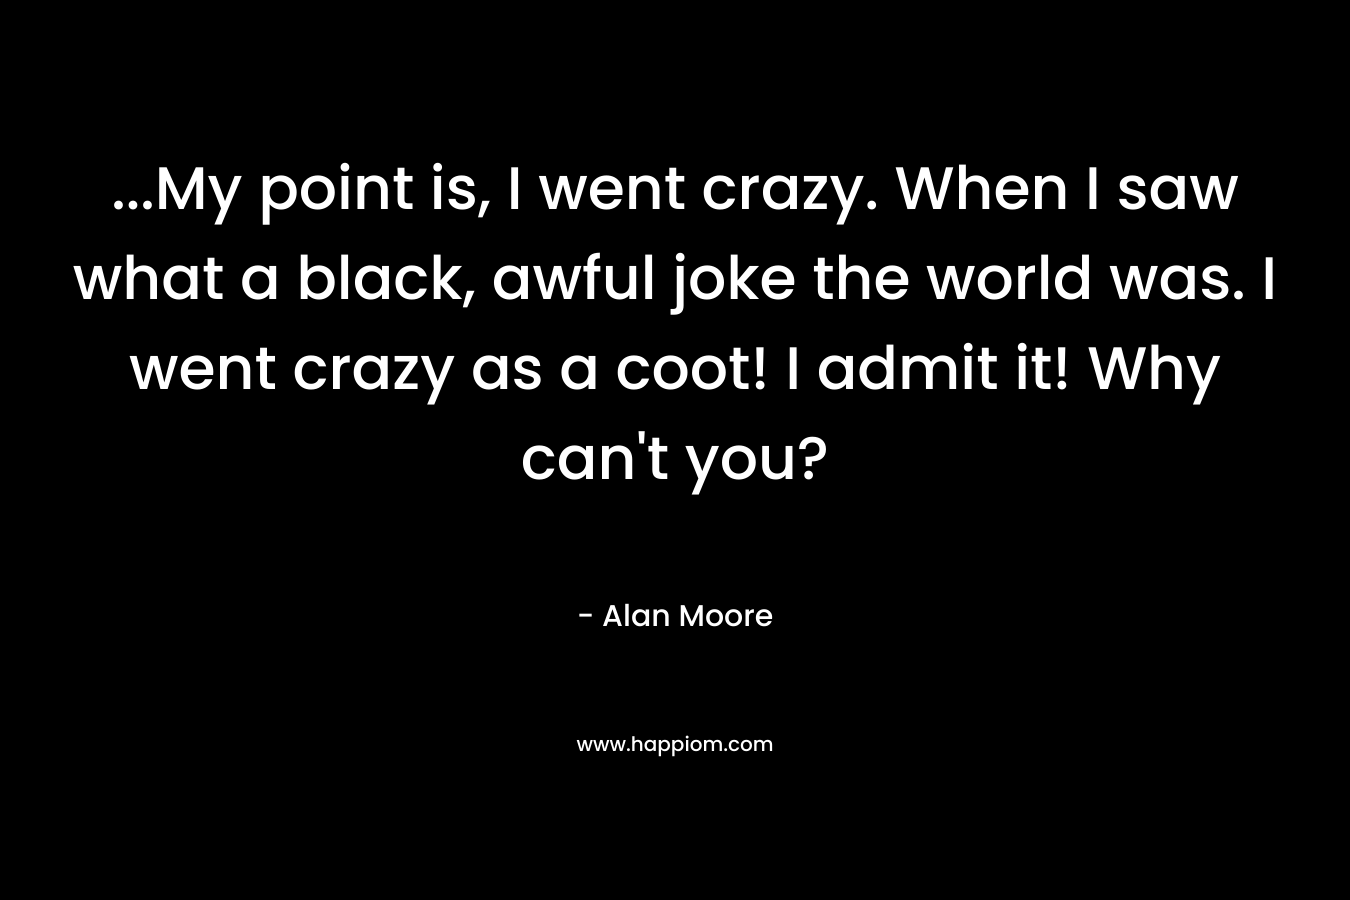 …My point is, I went crazy. When I saw what a black, awful joke the world was. I went crazy as a coot! I admit it! Why can’t you? – Alan Moore